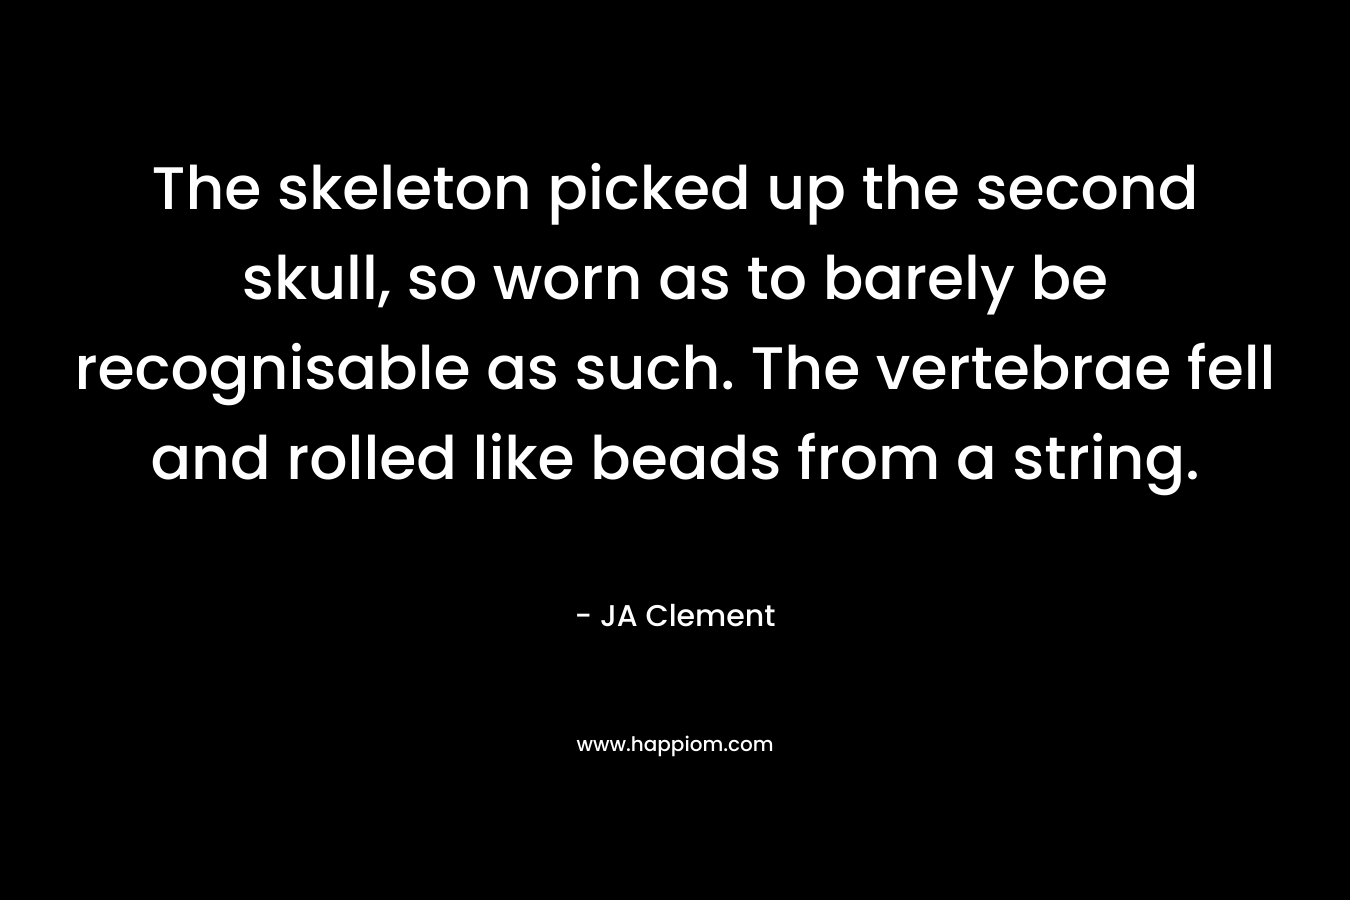 The skeleton picked up the second skull, so worn as to barely be recognisable as such. The vertebrae fell and rolled like beads from a string.